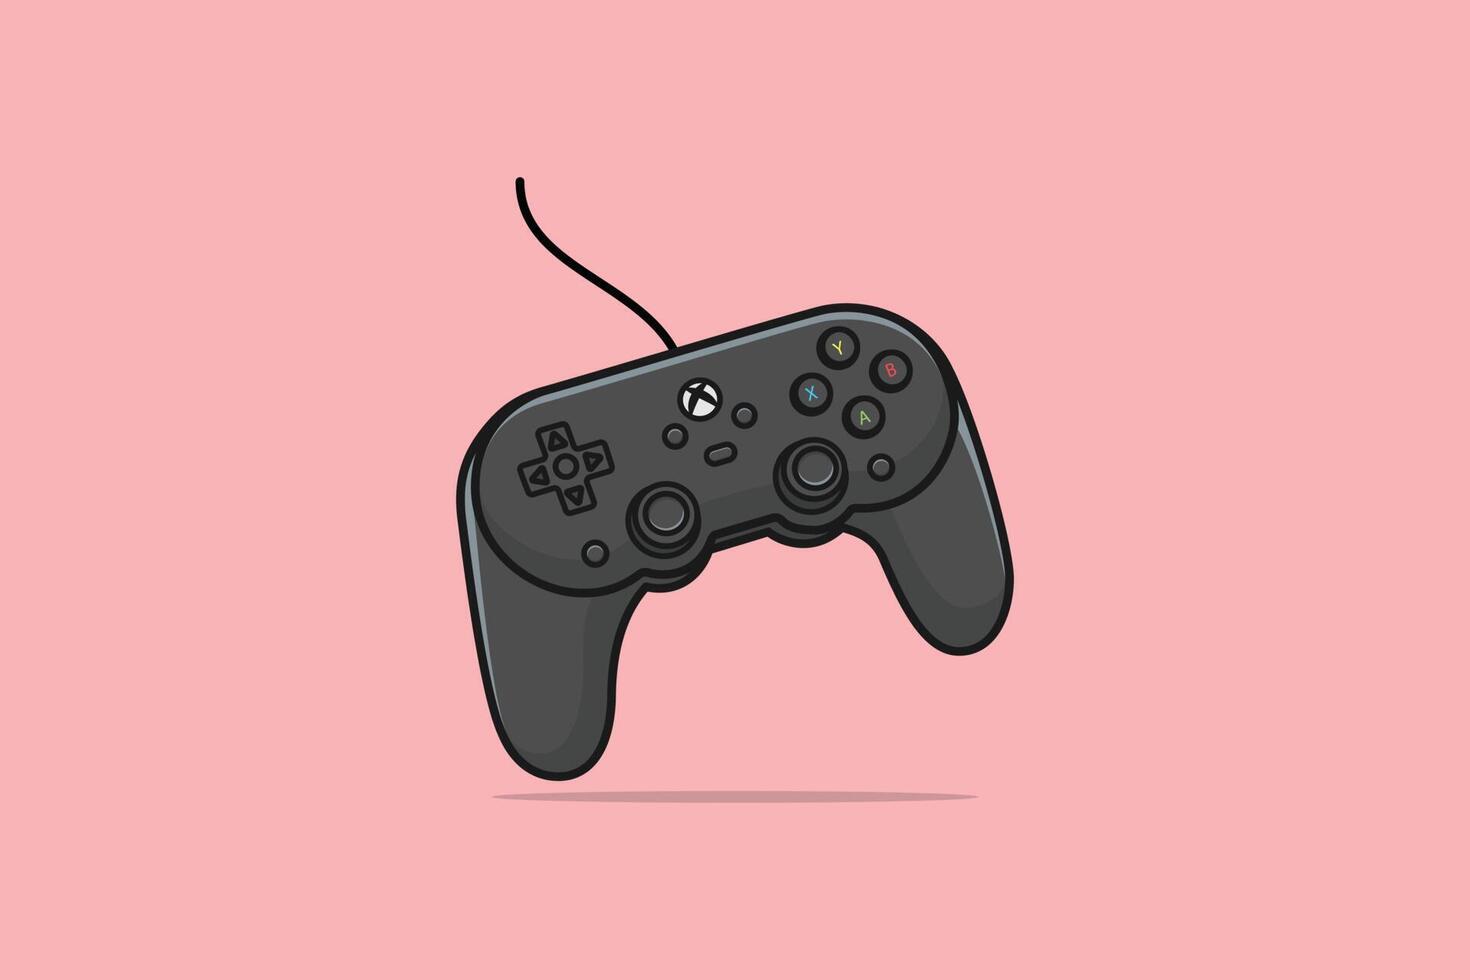 Joystick Controller and Game Pad Stick vector illustration. Sports and technology gaming objects icon concept. Video game controller or game console vector design with shadow on orange background.